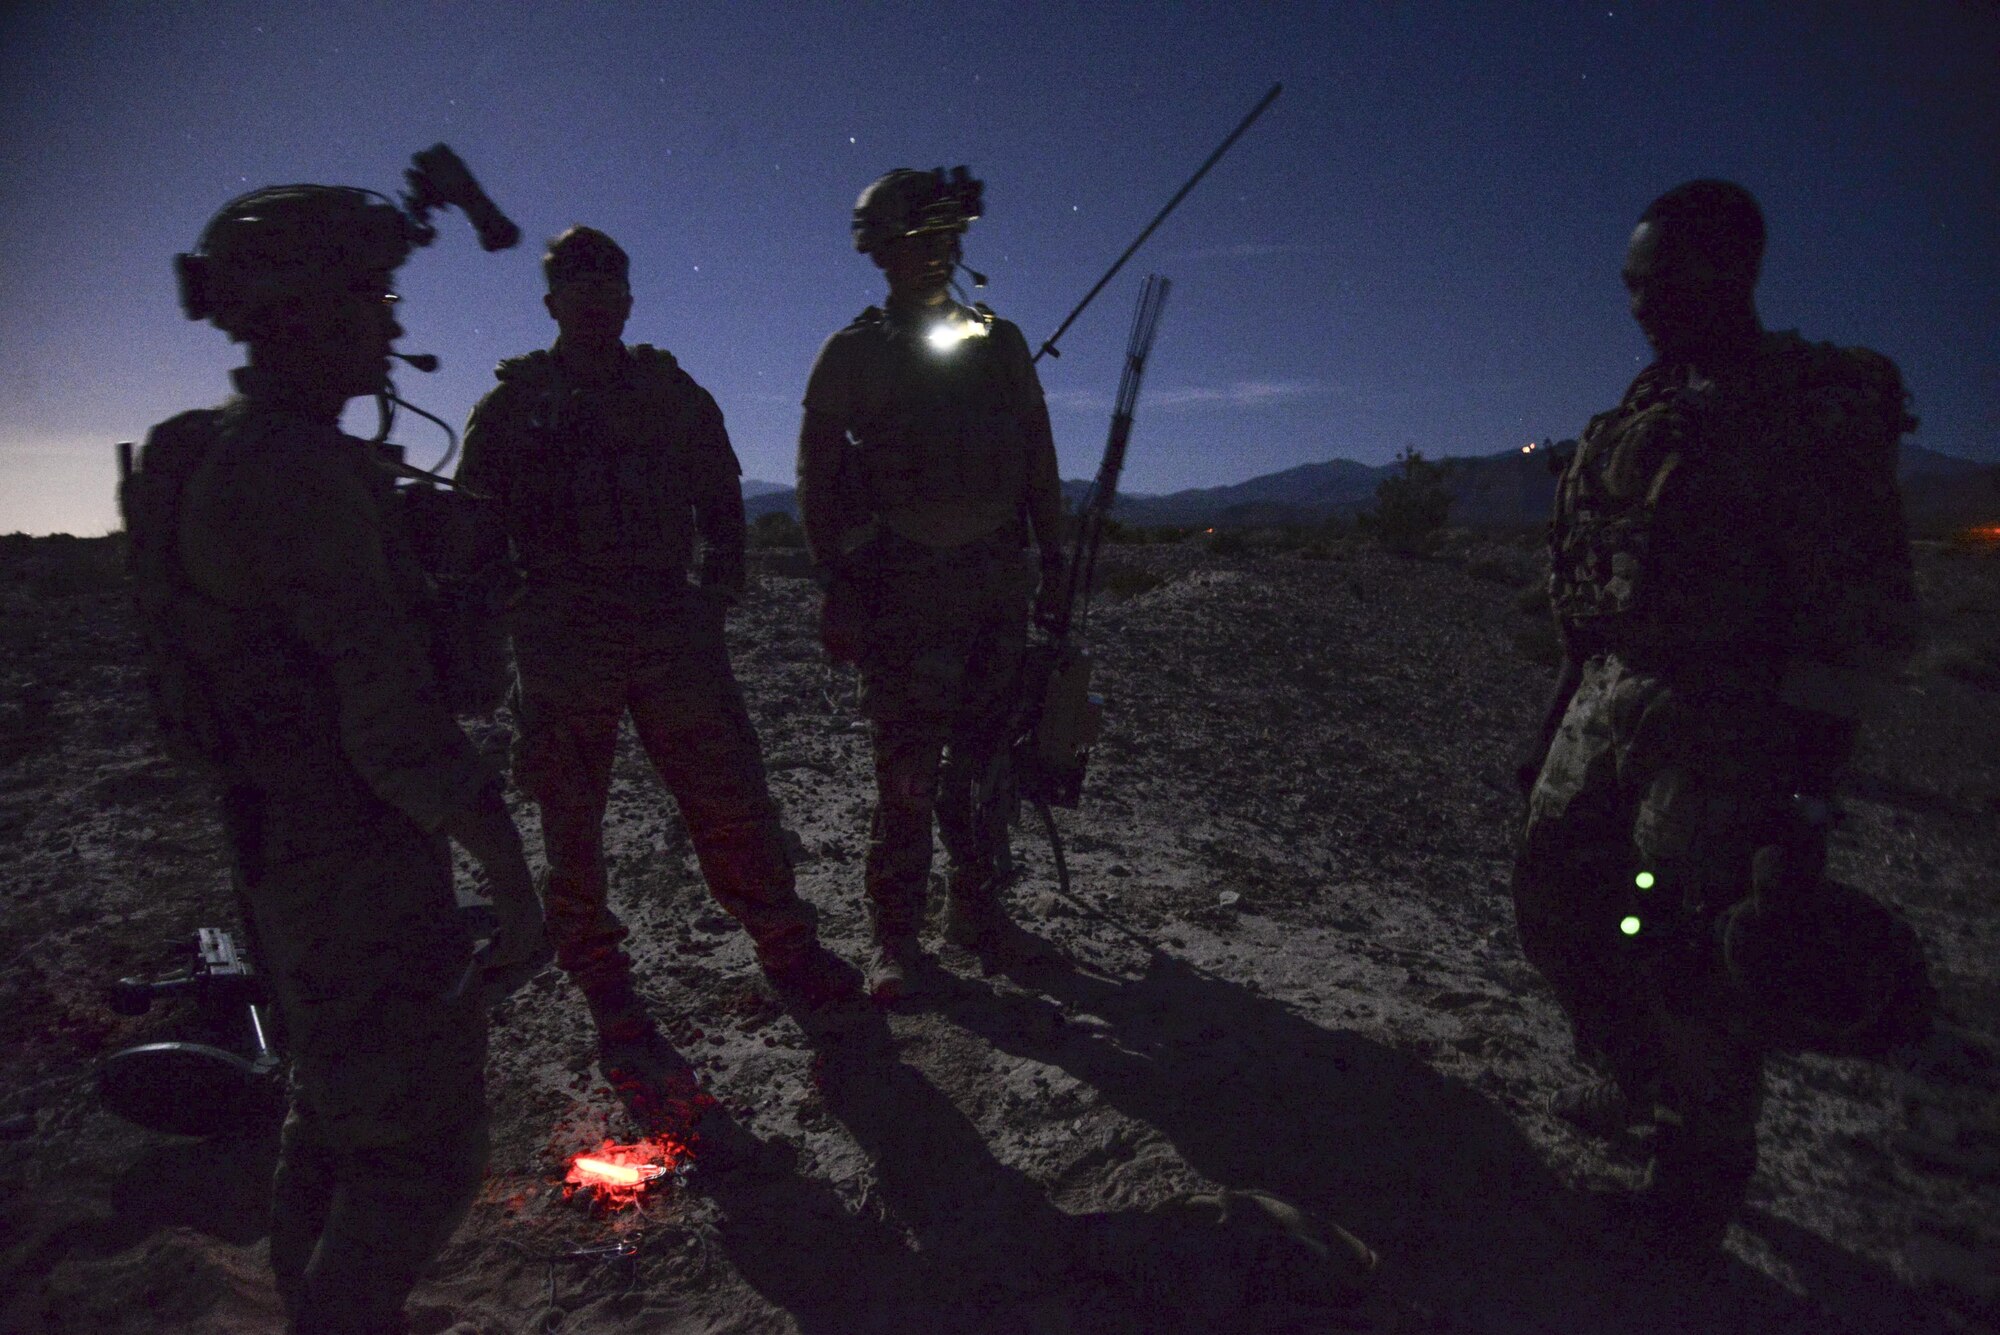 99th Civil Engineer Squadron explosive ordnance team members discuss how to safely disable a simulated roadside bomb at night during a bivouac exercise at the Nevada Test and Training Range, June 7, 2017. The training proctors based the scenarios off of real-world experiences they faced in deployed environments. (U.S. Air Force photo by Airman 1st Class Andrew D. Sarver/Released)